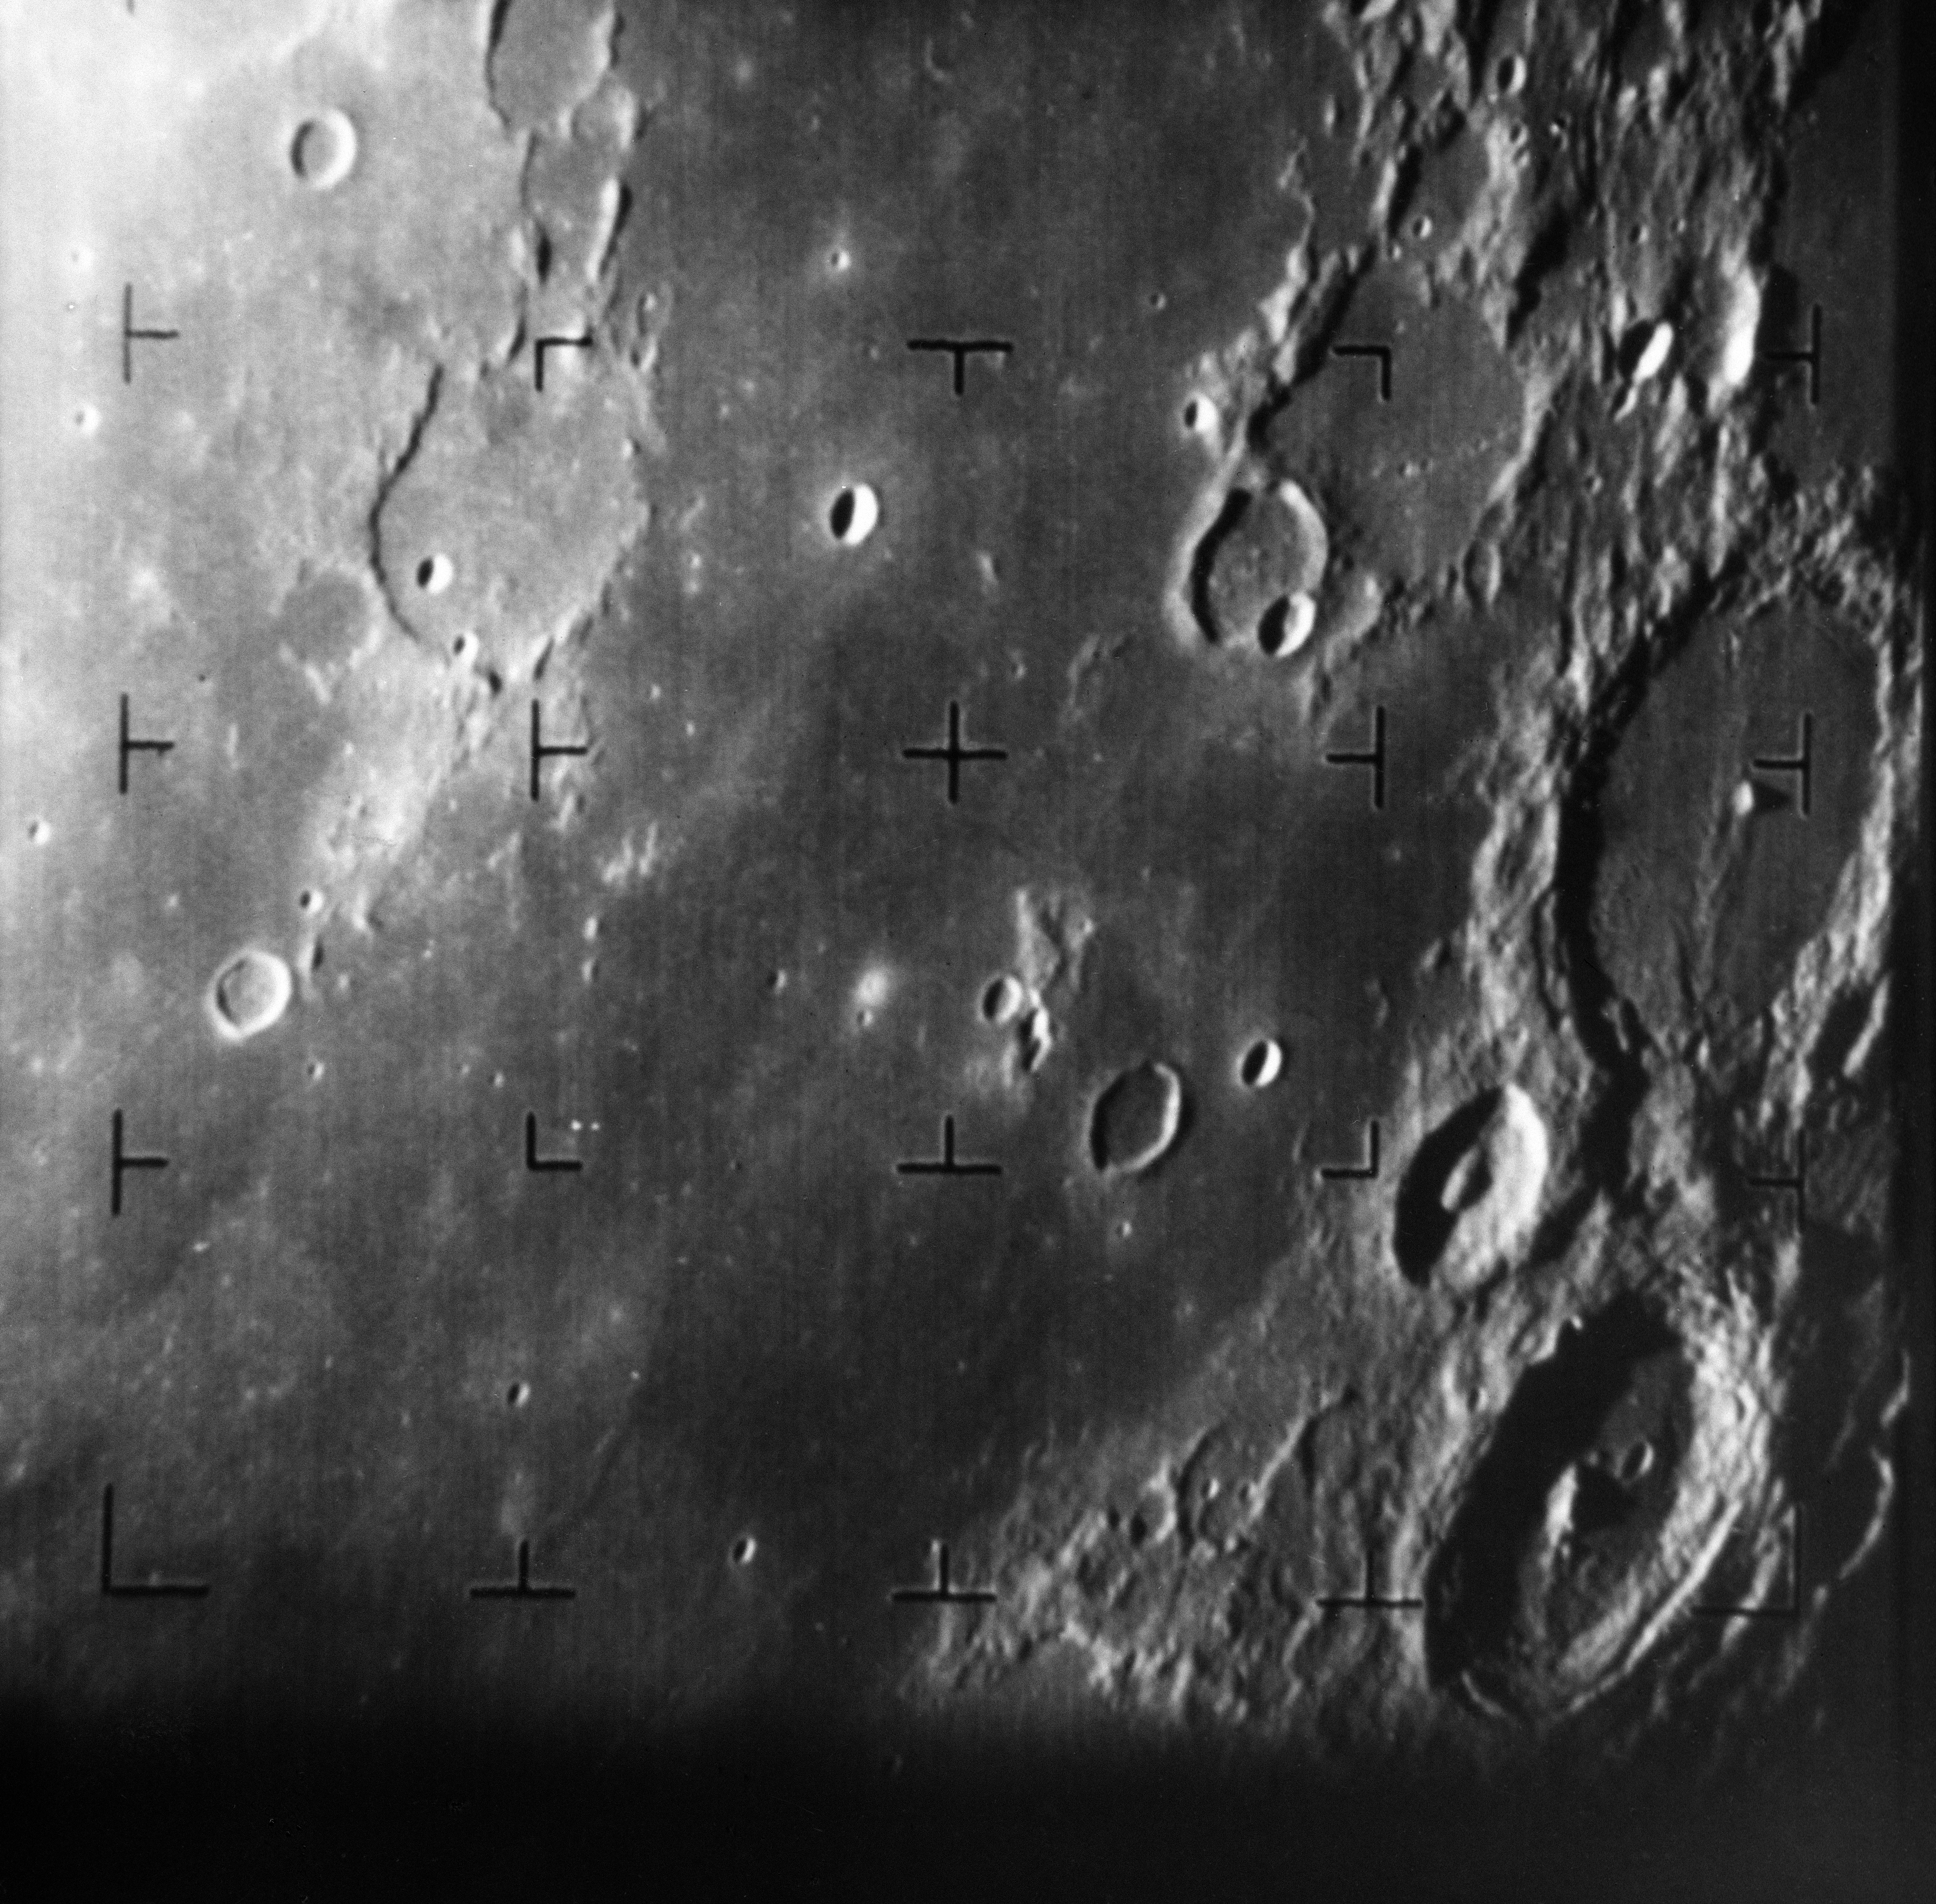 Black and white image of craters on the moon.